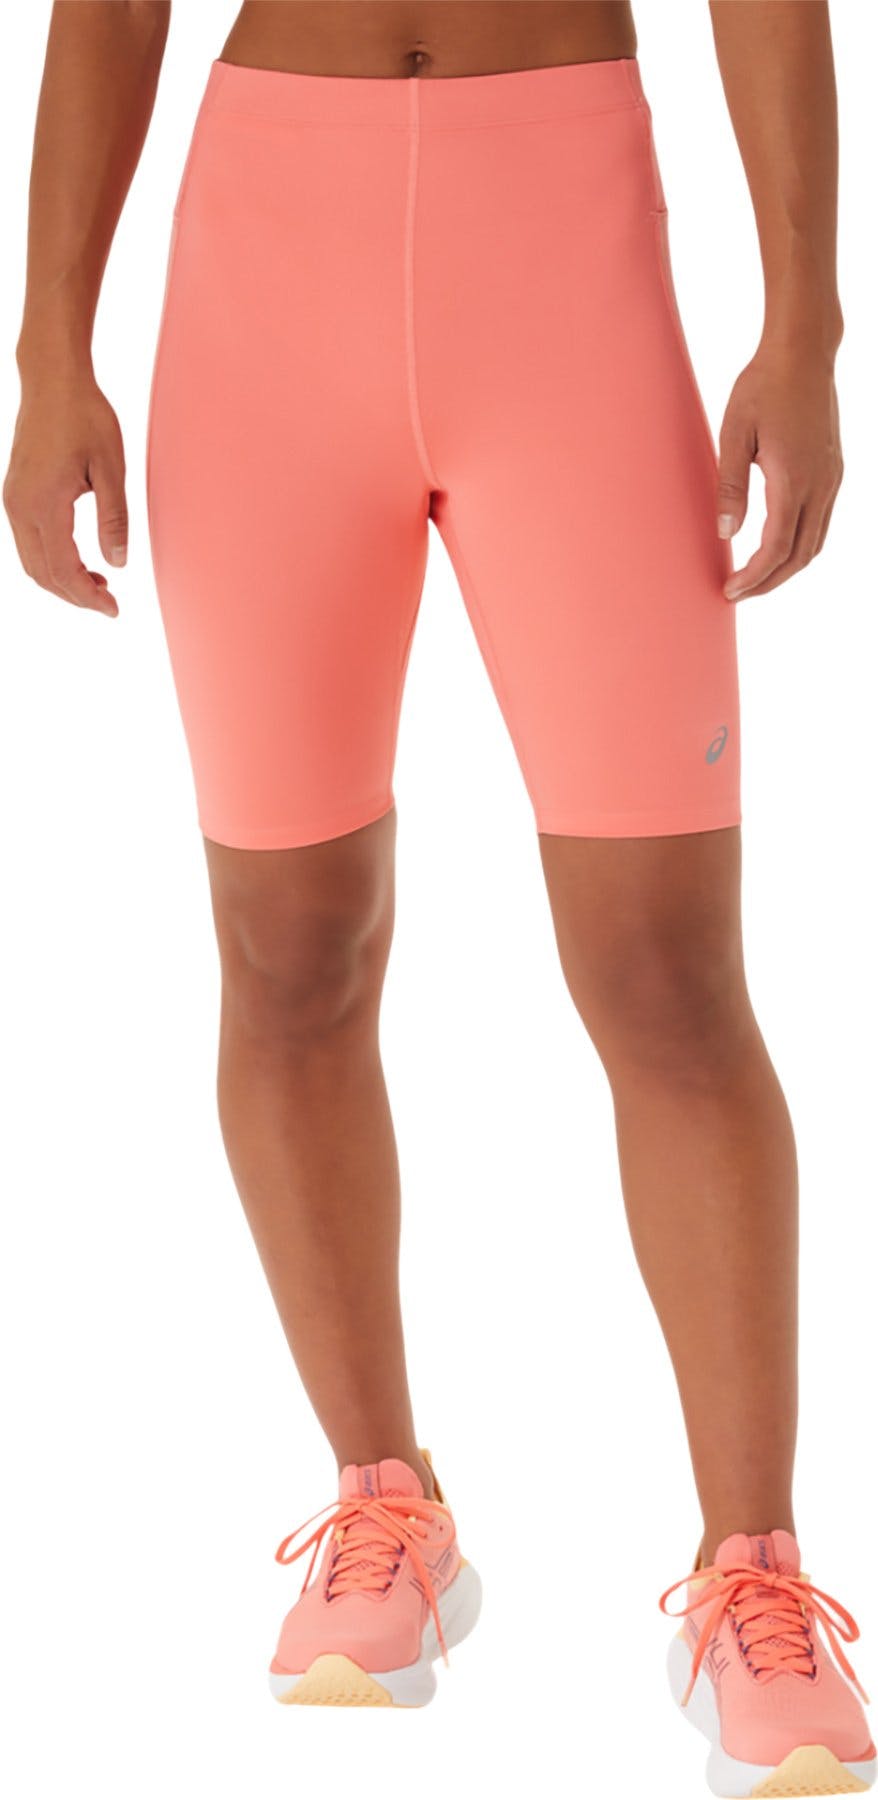 Product image for Race Sprinter Tight - Women's